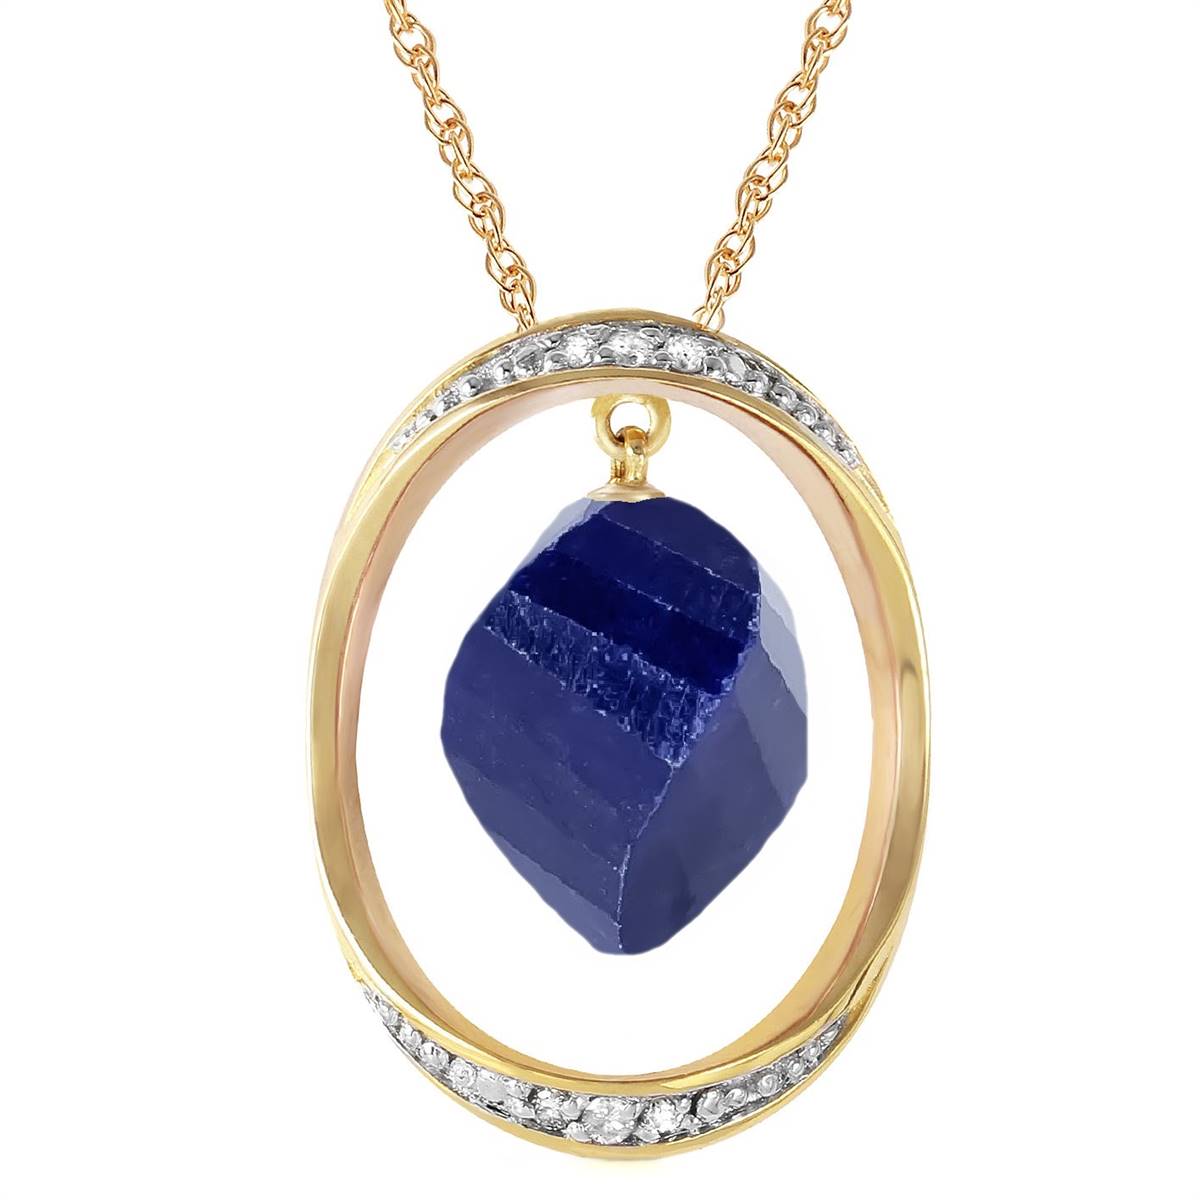 14K Solid Yellow Gold Necklace w/ Twisted Briolette Dyed Sapphire & Diamonds